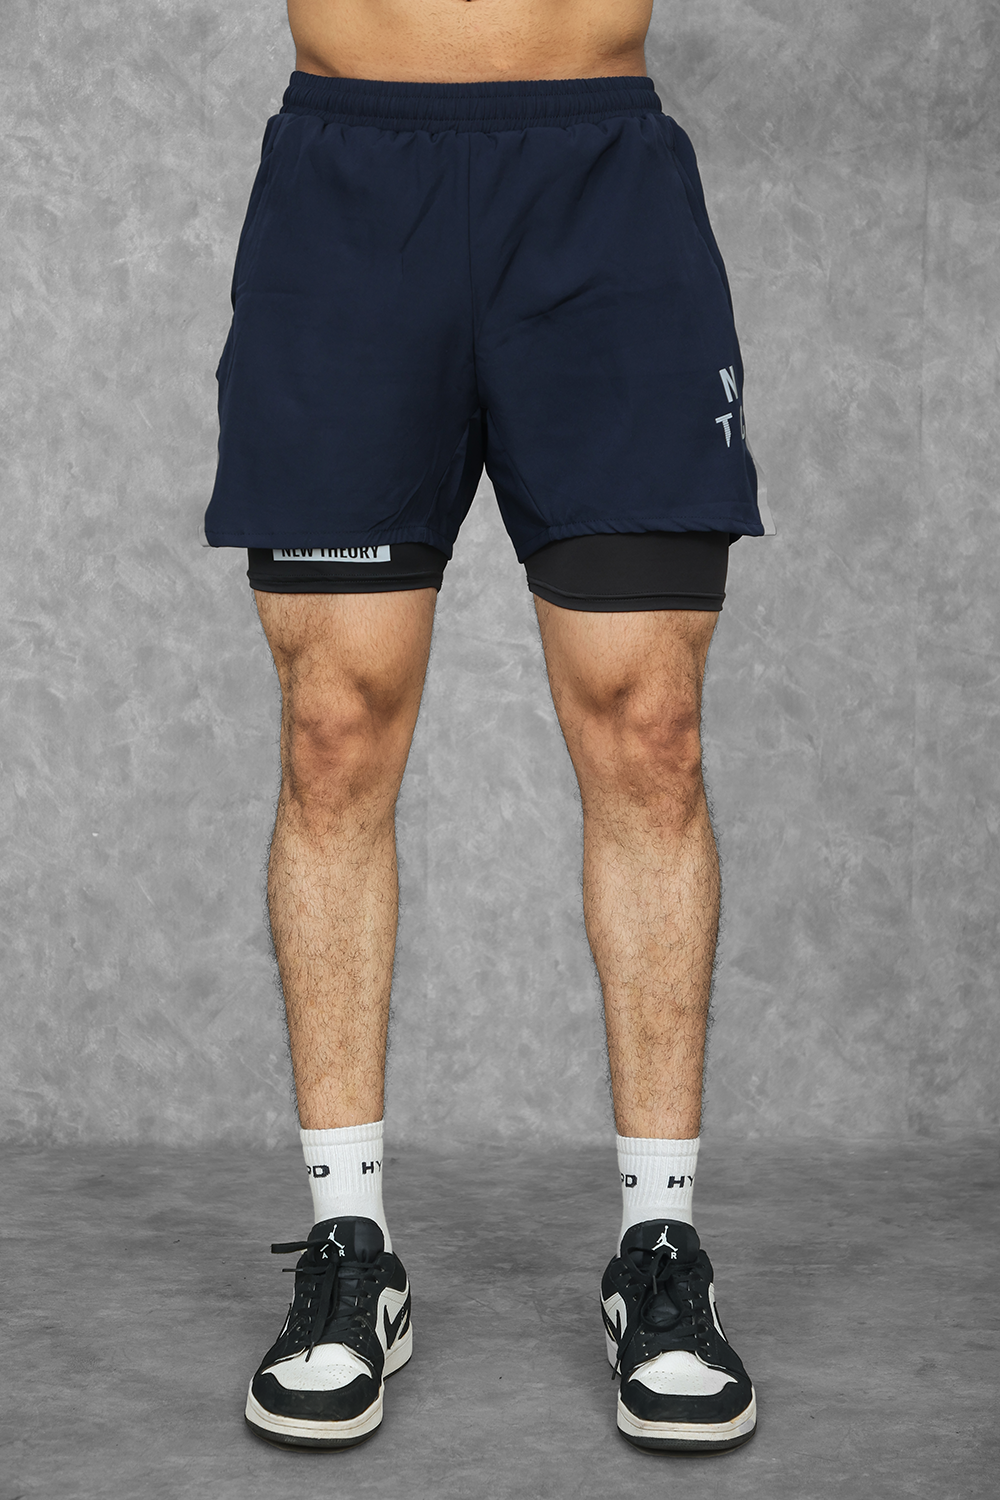 Critical performance Shorts 5 Inch - Navy